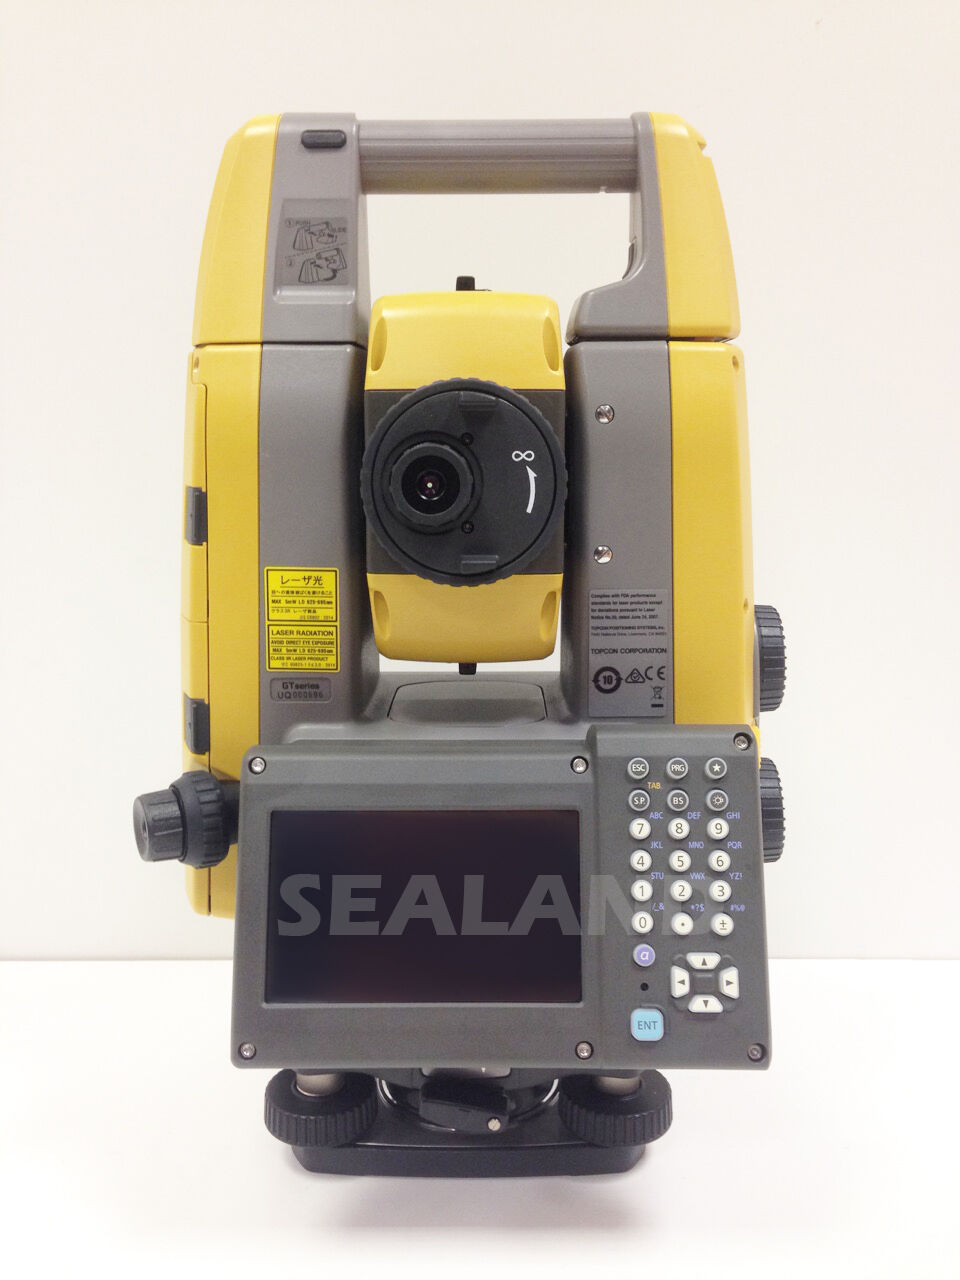 Topcon GT Series Robotic Total Station - Full Training Available